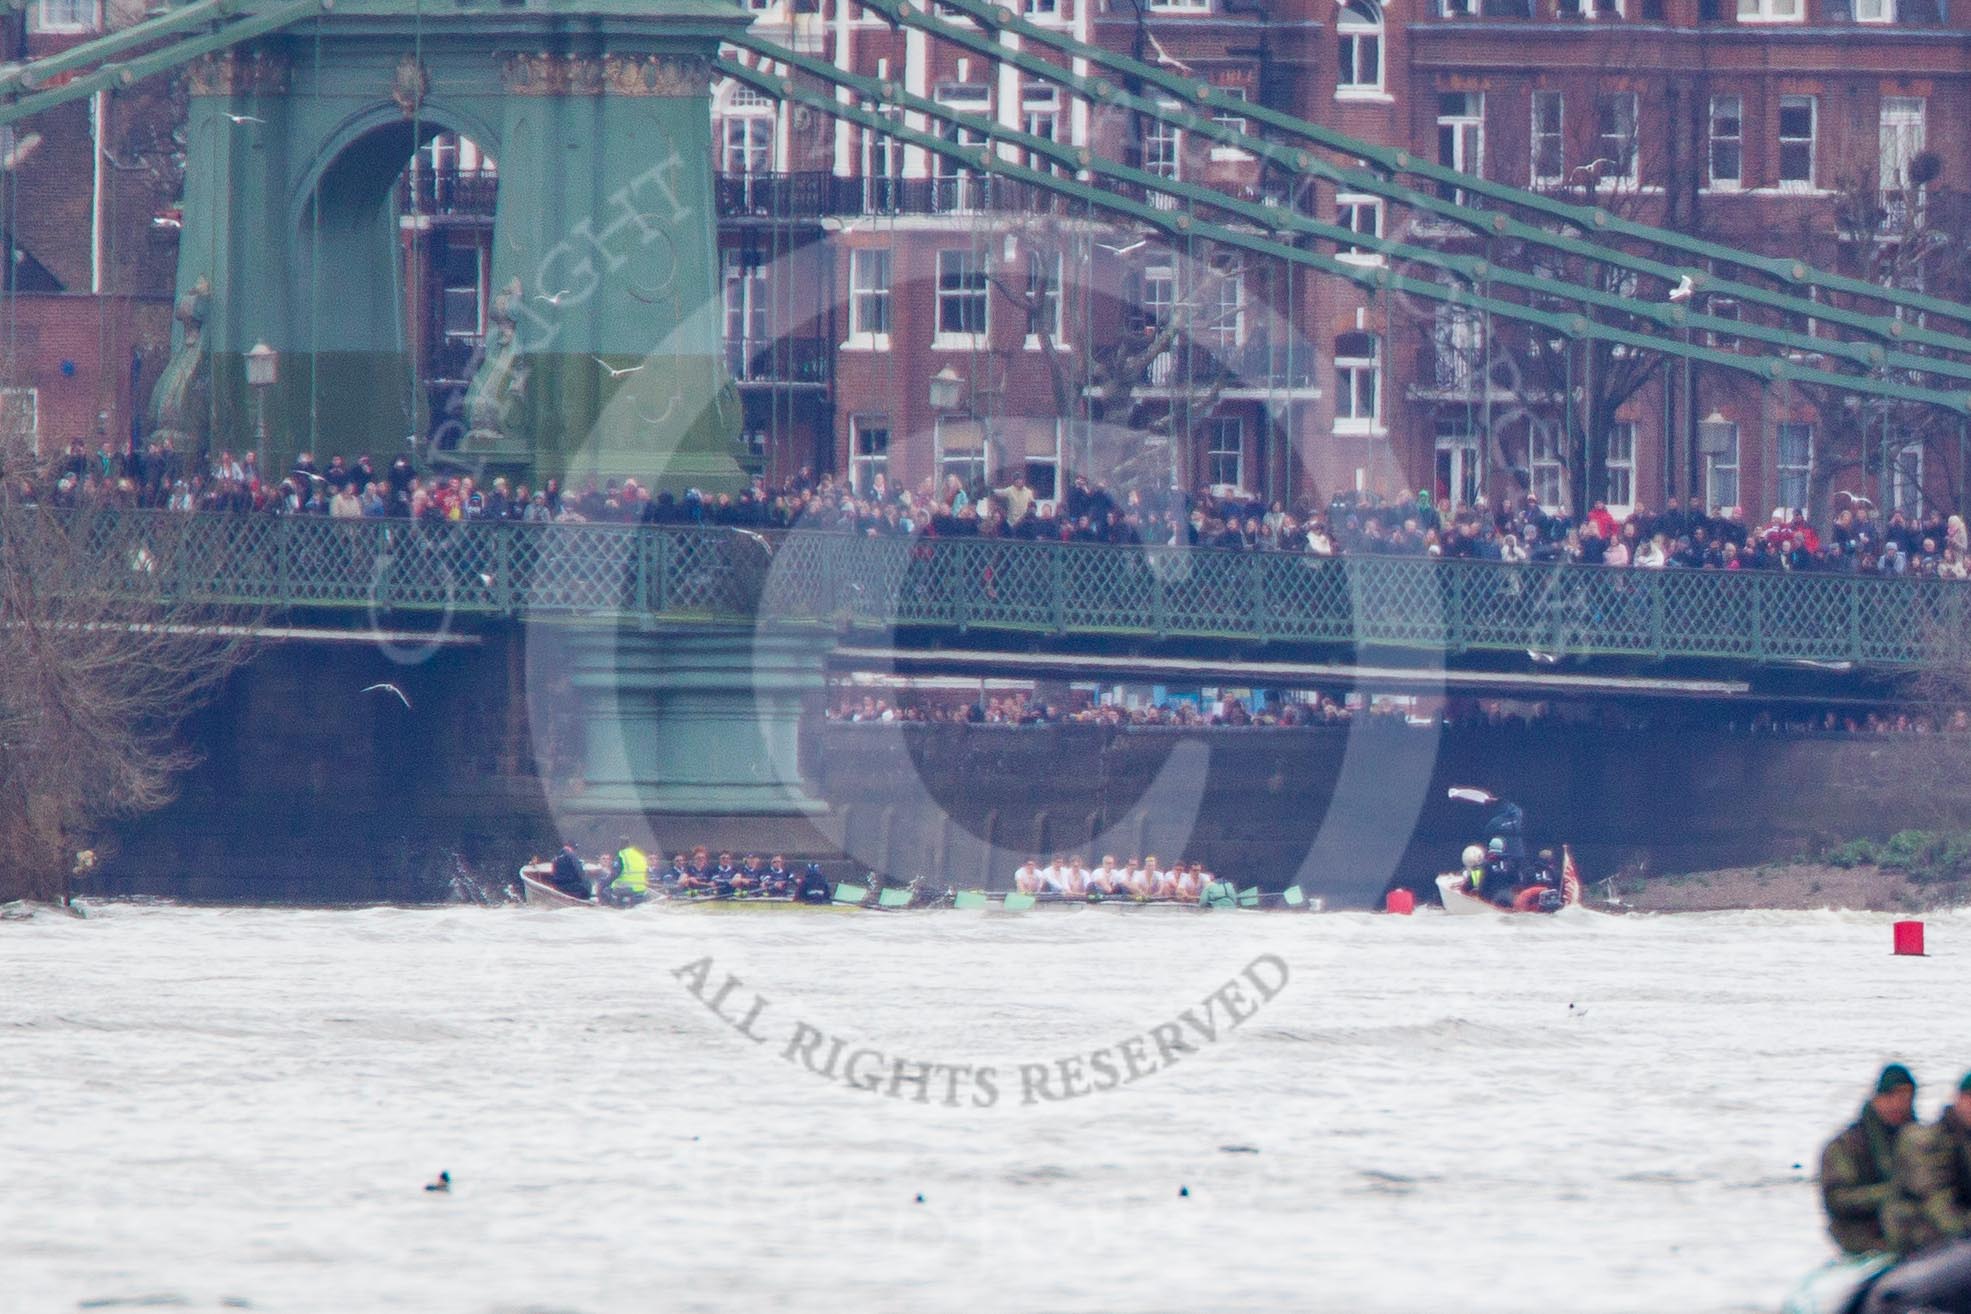 The Boat Race 2013.
Putney,
London SW15,

United Kingdom,
on 31 March 2013 at 16:06, image #219